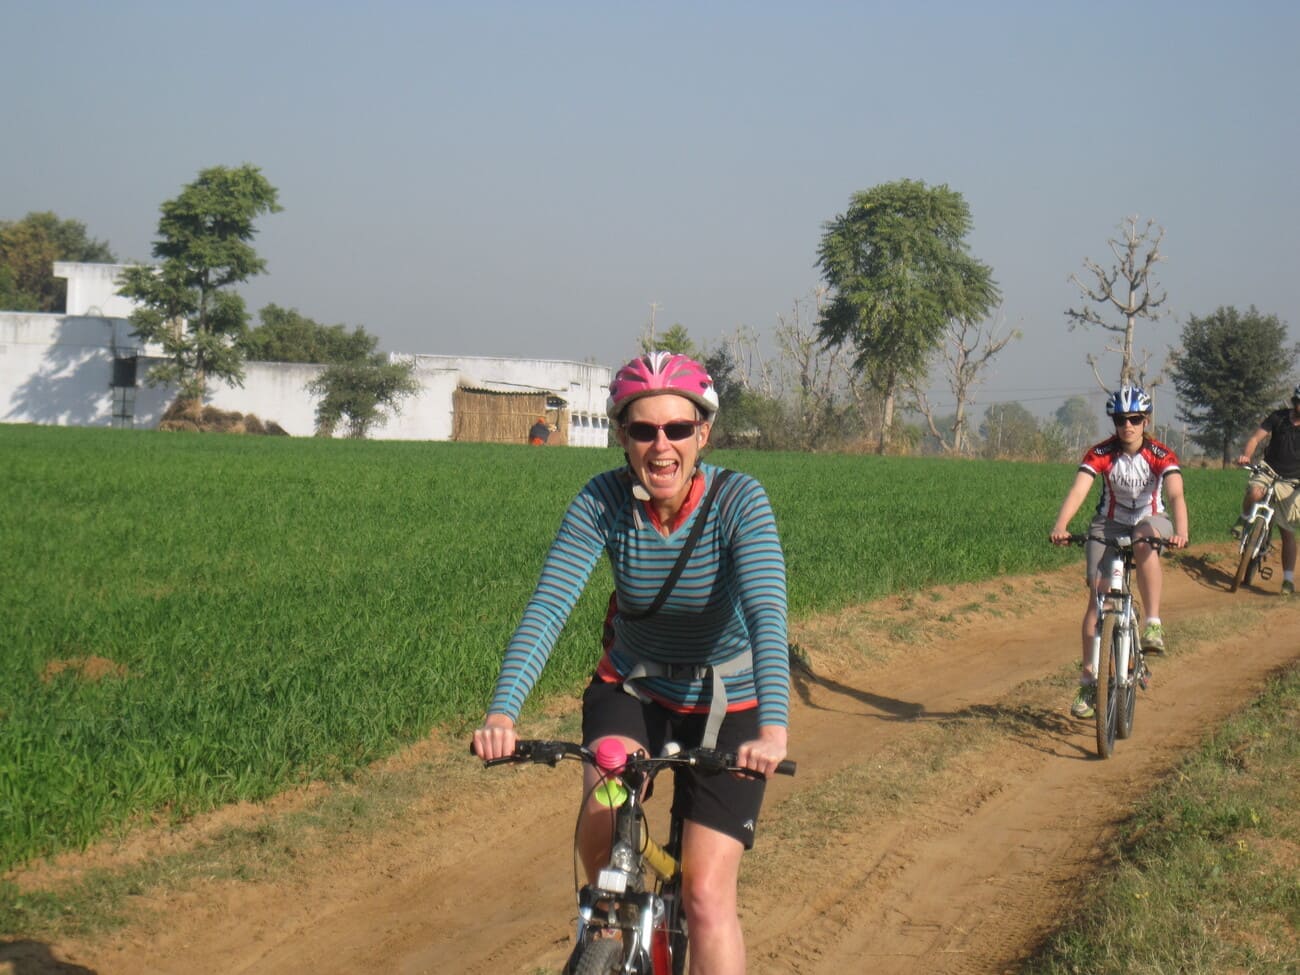 Cycling through the green field of the farms